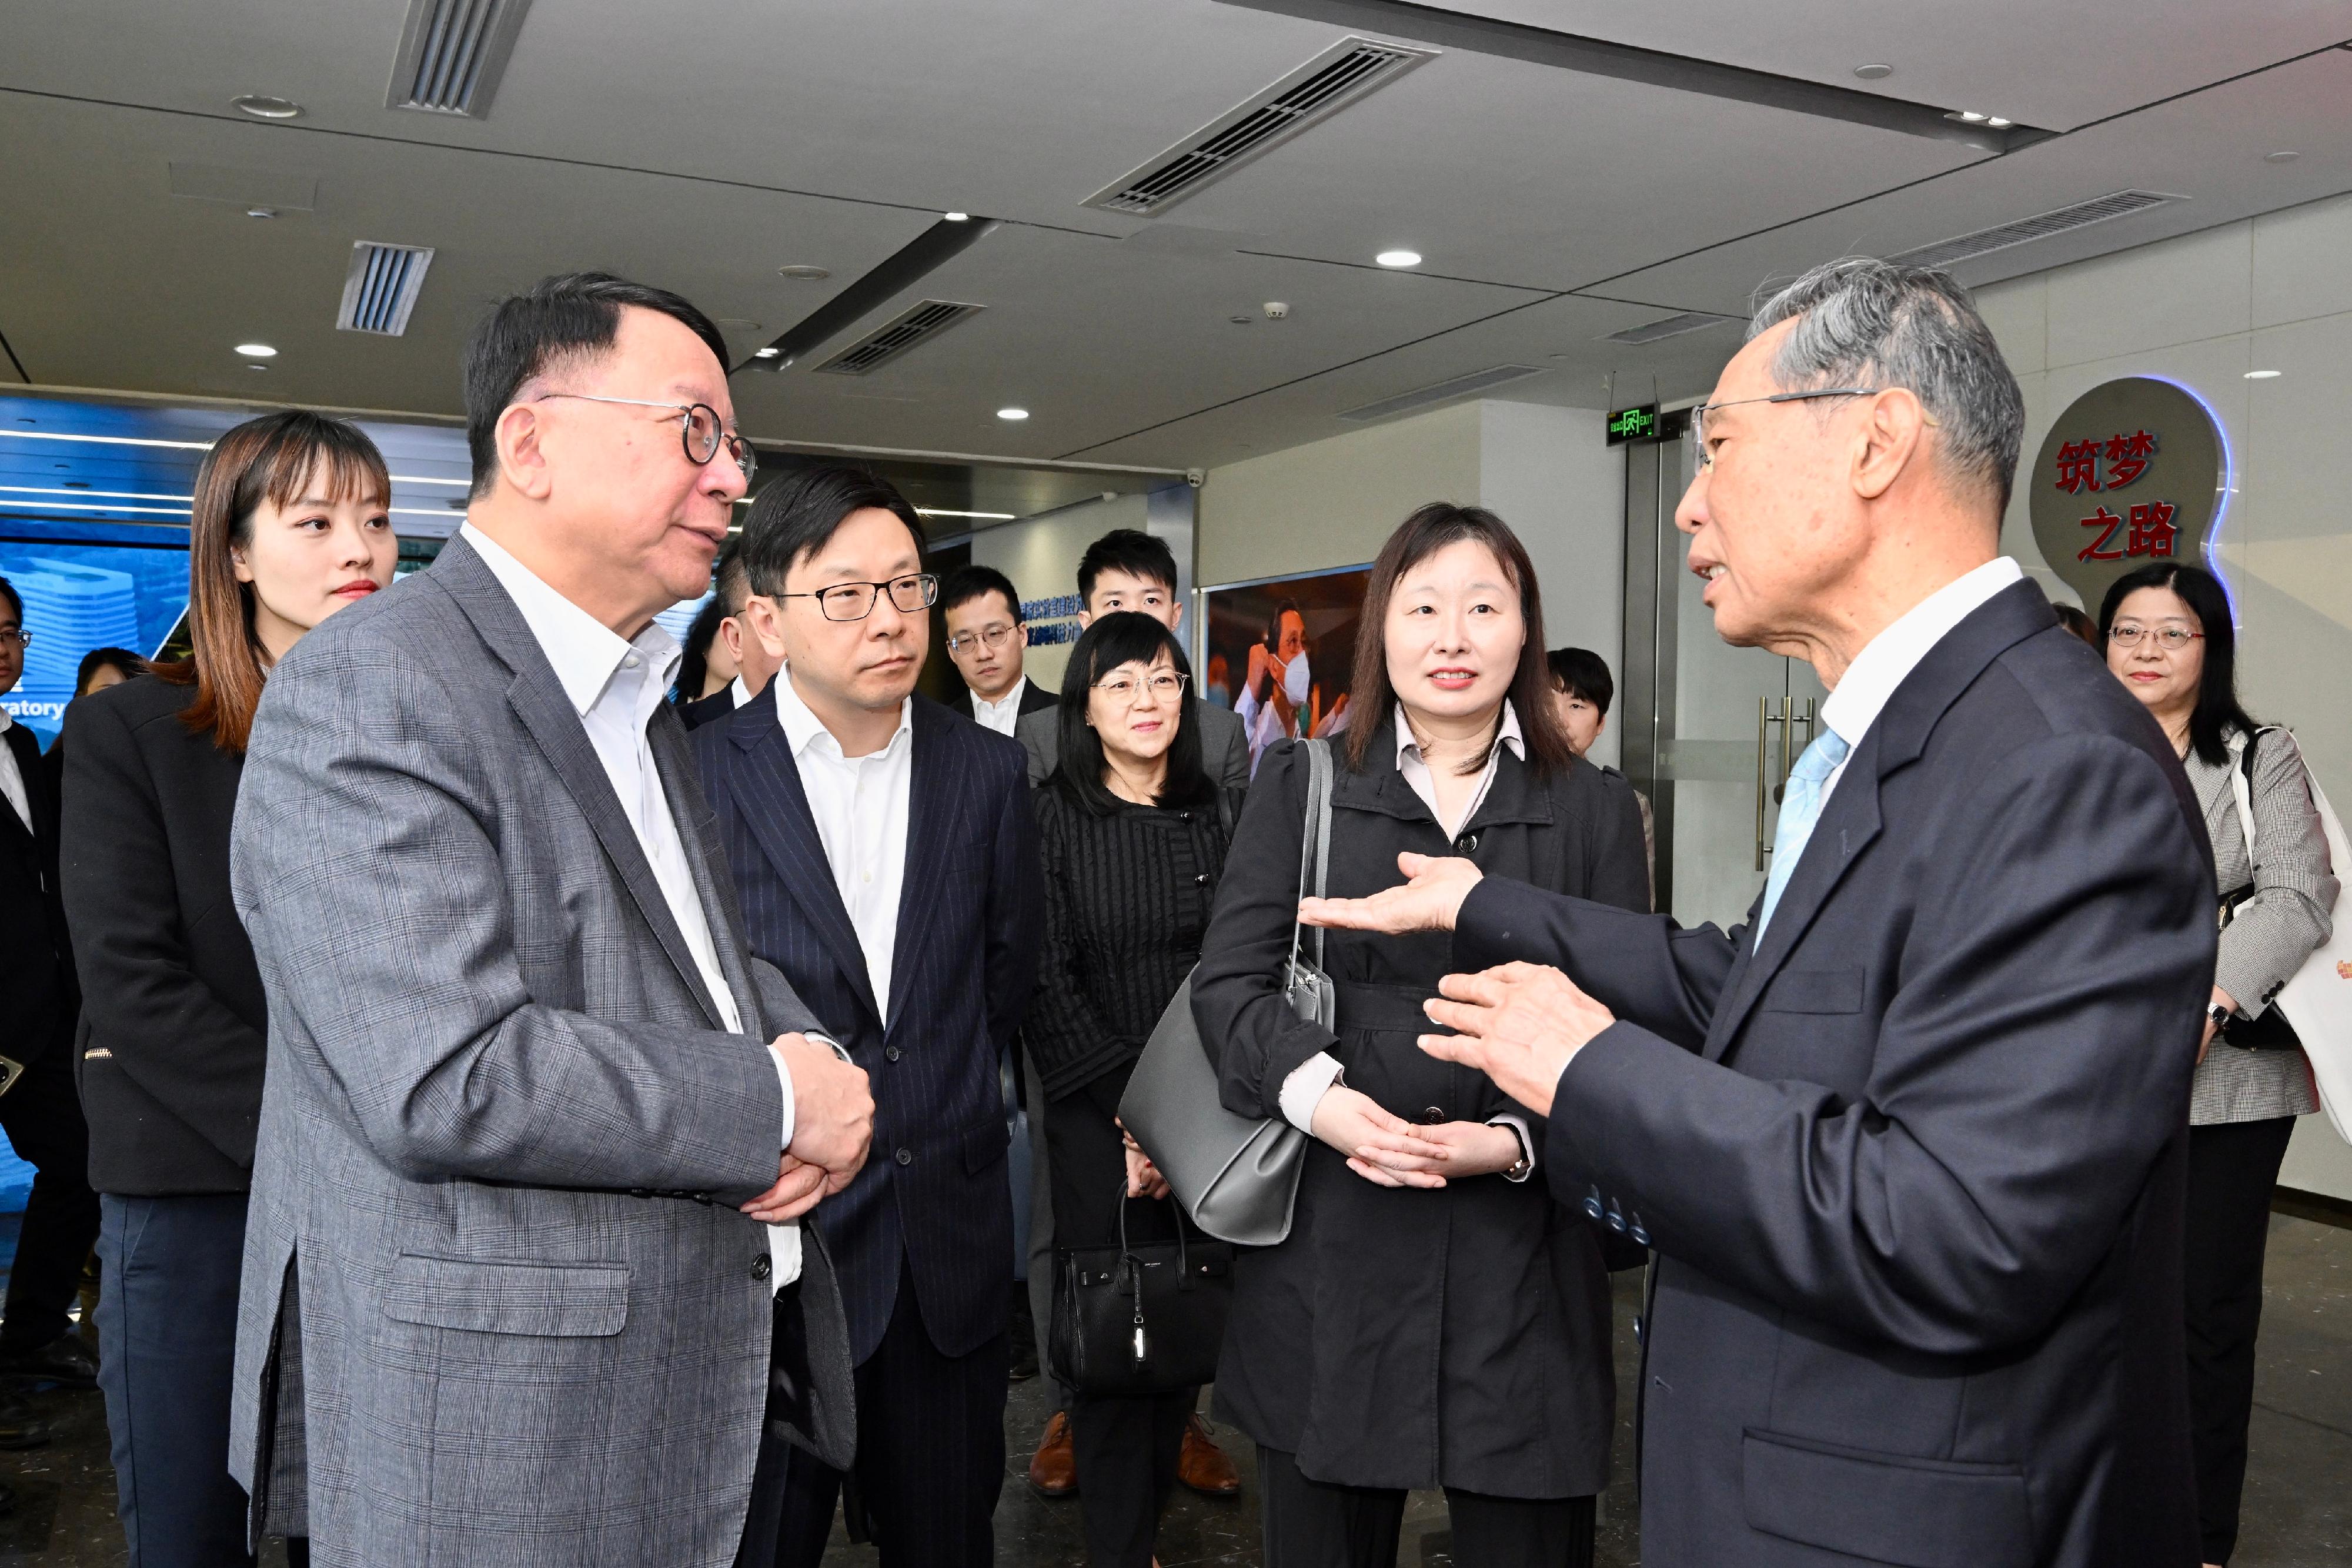 The Chief Secretary for Administration, Mr Chan Kwok-ki, arrived in Guangzhou today (January 8) to begin his visit to Mainland cities of the Guangdong-Hong Kong-Macao Greater Bay Area. Photo shows Mr Chan (second left) receiving a briefing from academian of the Chinese Academy of Engineering Professor Zhong Nanshan (first right) at the Guangzhou National Laboratory. Looking on are the Under Secretary for Innovation, Technology and Industry, Ms Lillian Cheong (first left), and the Secretary for Labour and Welfare, Mr Chris Sun (third left).